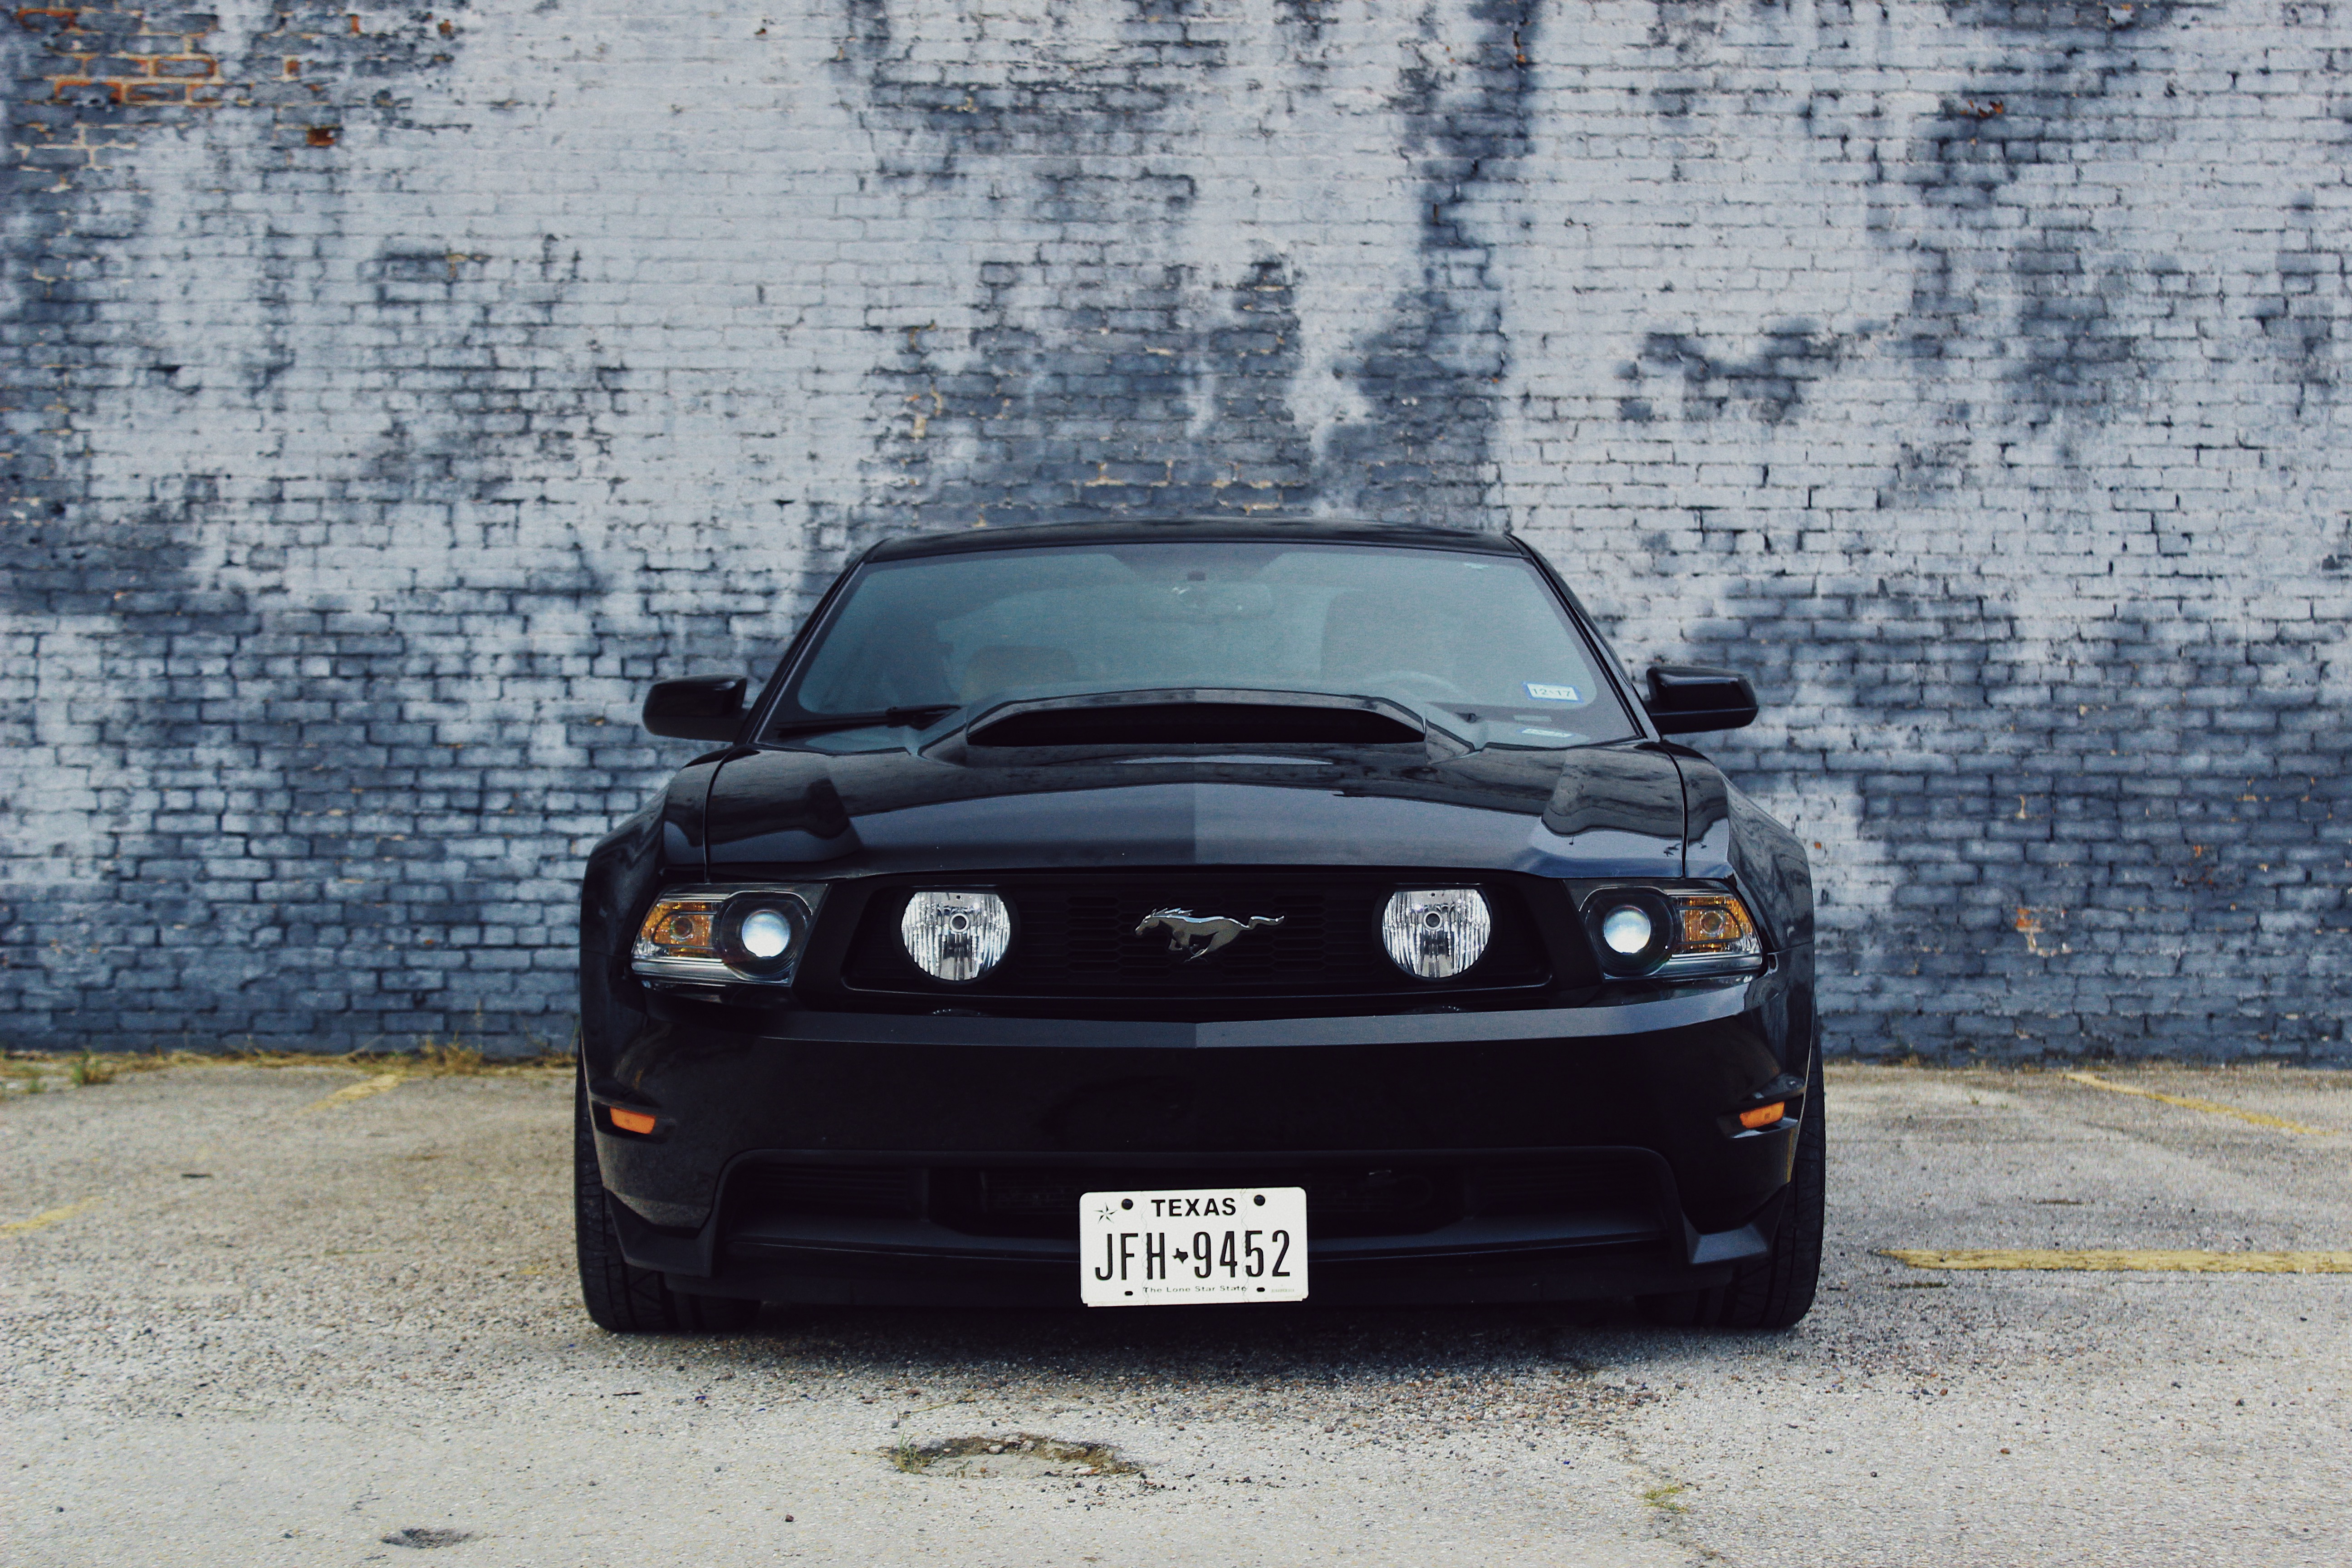 ford mustang, cars, black, car, front view 32K